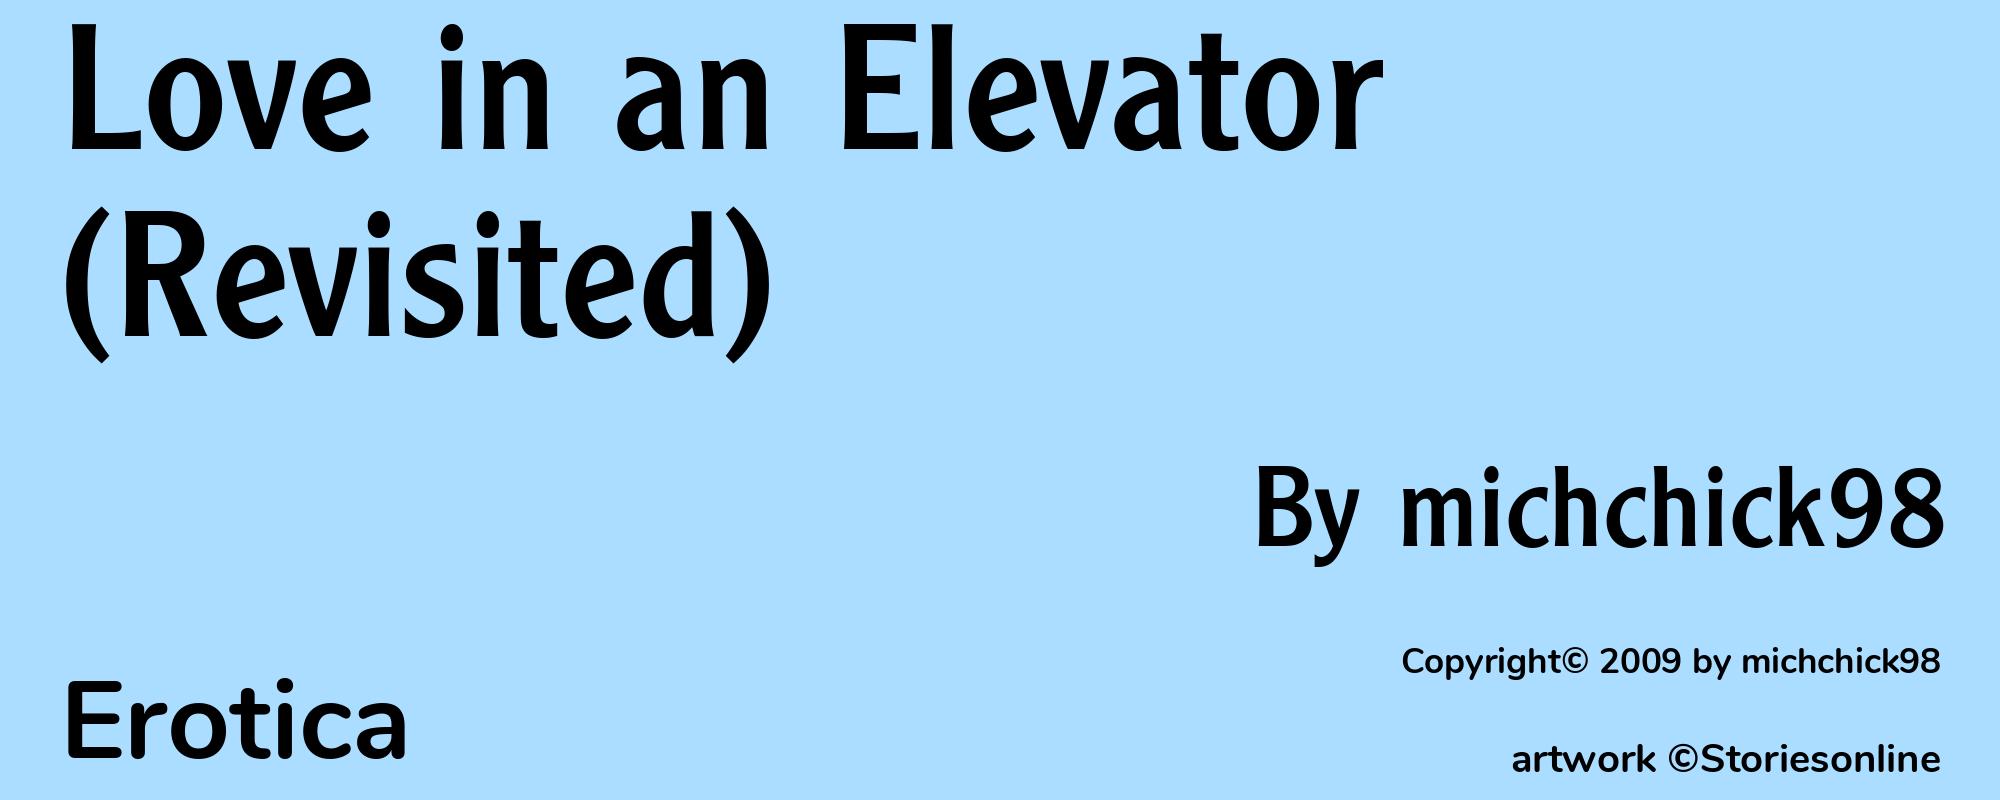 Love in an Elevator (Revisited) - Cover